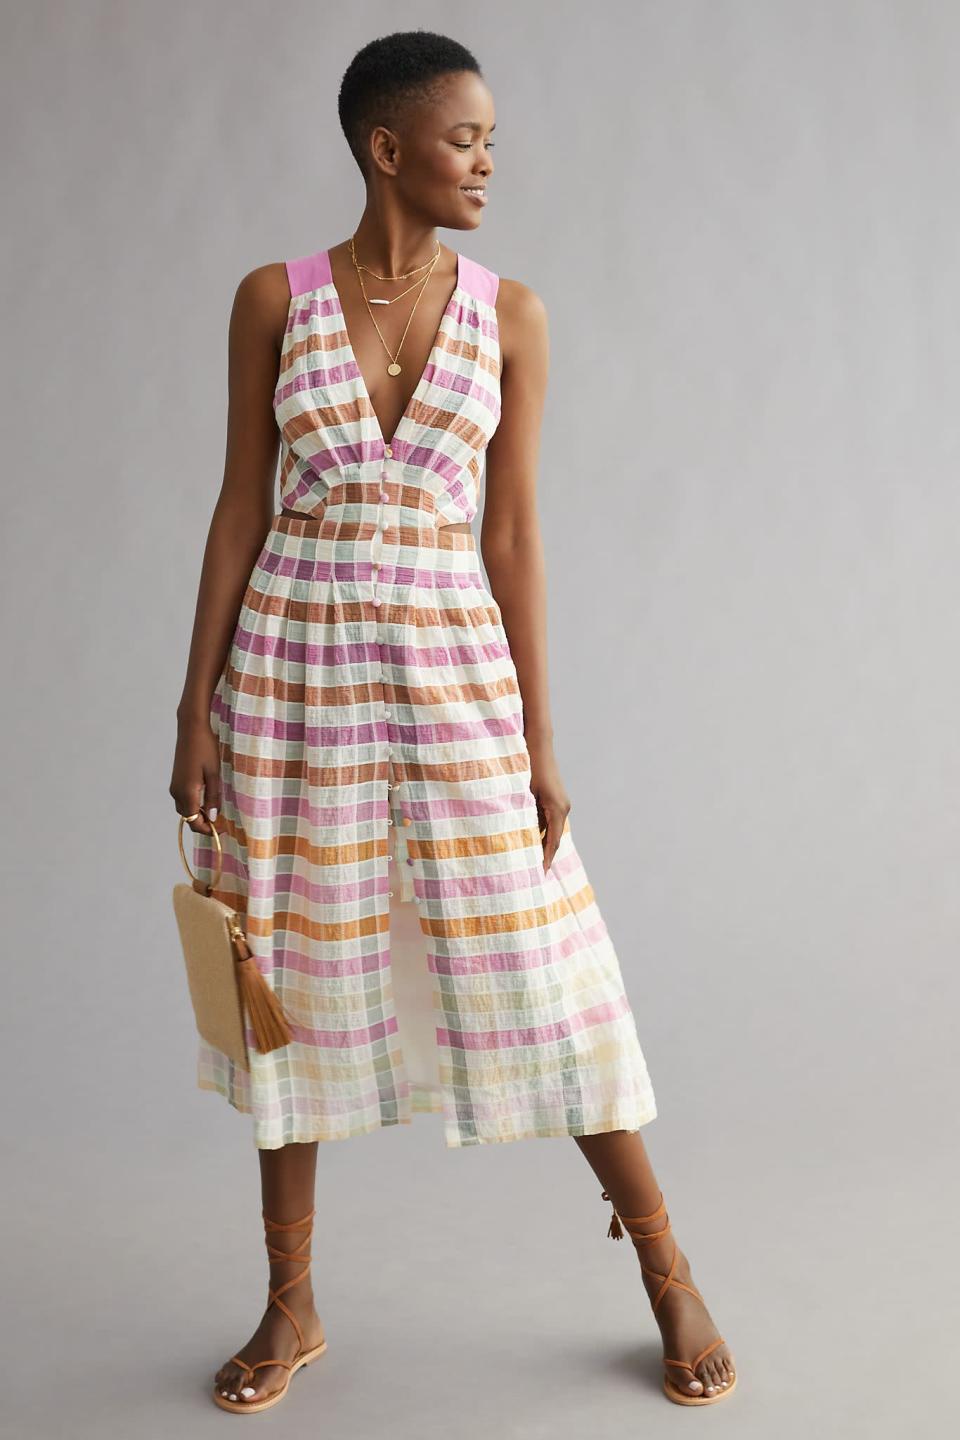 <br><br><strong>Maeve</strong> Ombre Plaid Midi Sundress, $, available at <a href="https://go.skimresources.com/?id=30283X879131&url=https%3A%2F%2Fwww.anthropologie.com%2Fshop%2Fmaeve-ombre-plaid-midi-sundress" rel="nofollow noopener" target="_blank" data-ylk="slk:Anthropologie" class="link ">Anthropologie</a>